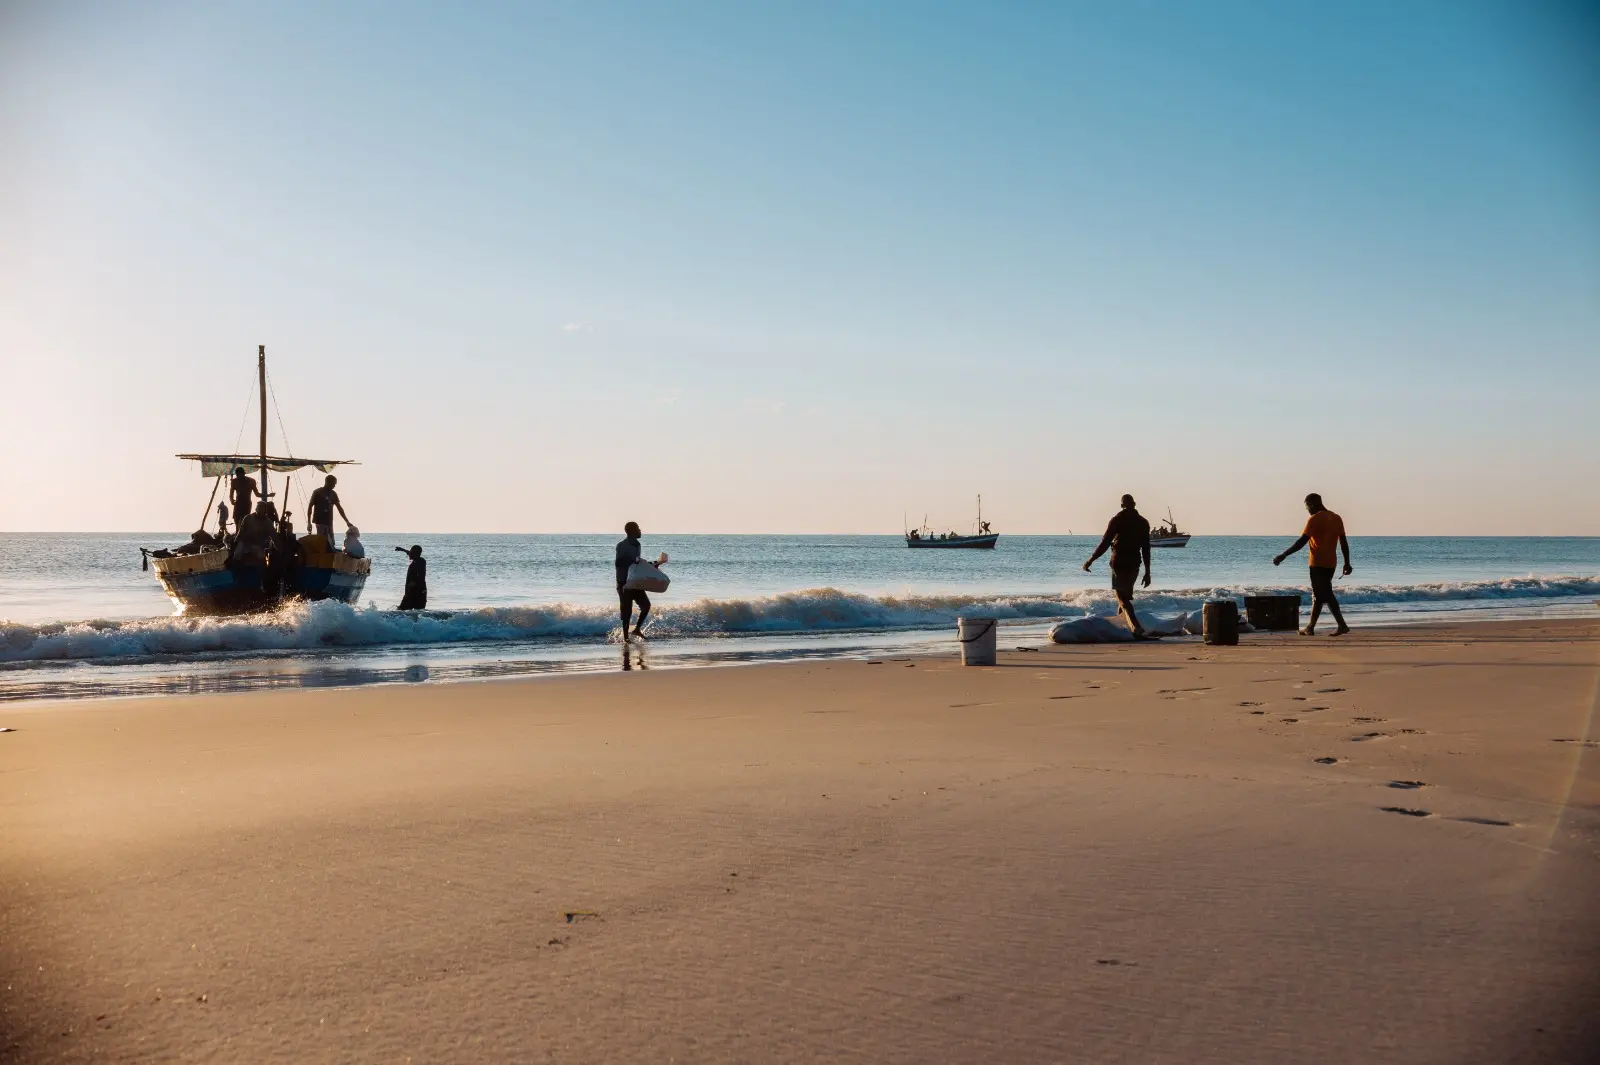 Fishermen at the Coast of Mozambique